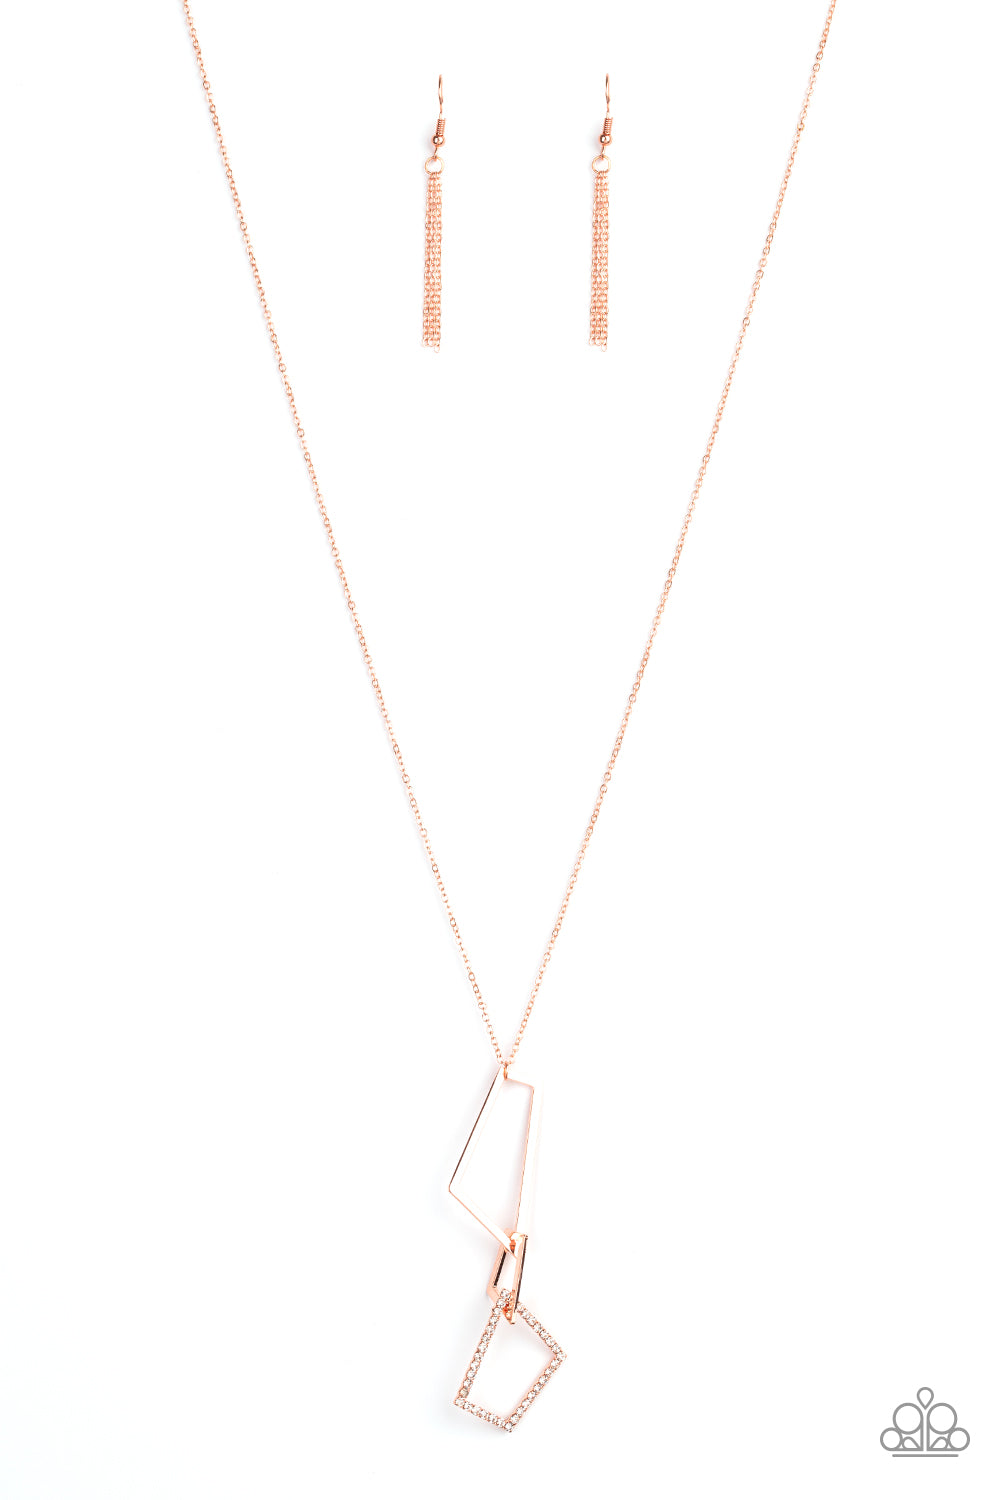 Shapely Silhouettes - Copper Necklace